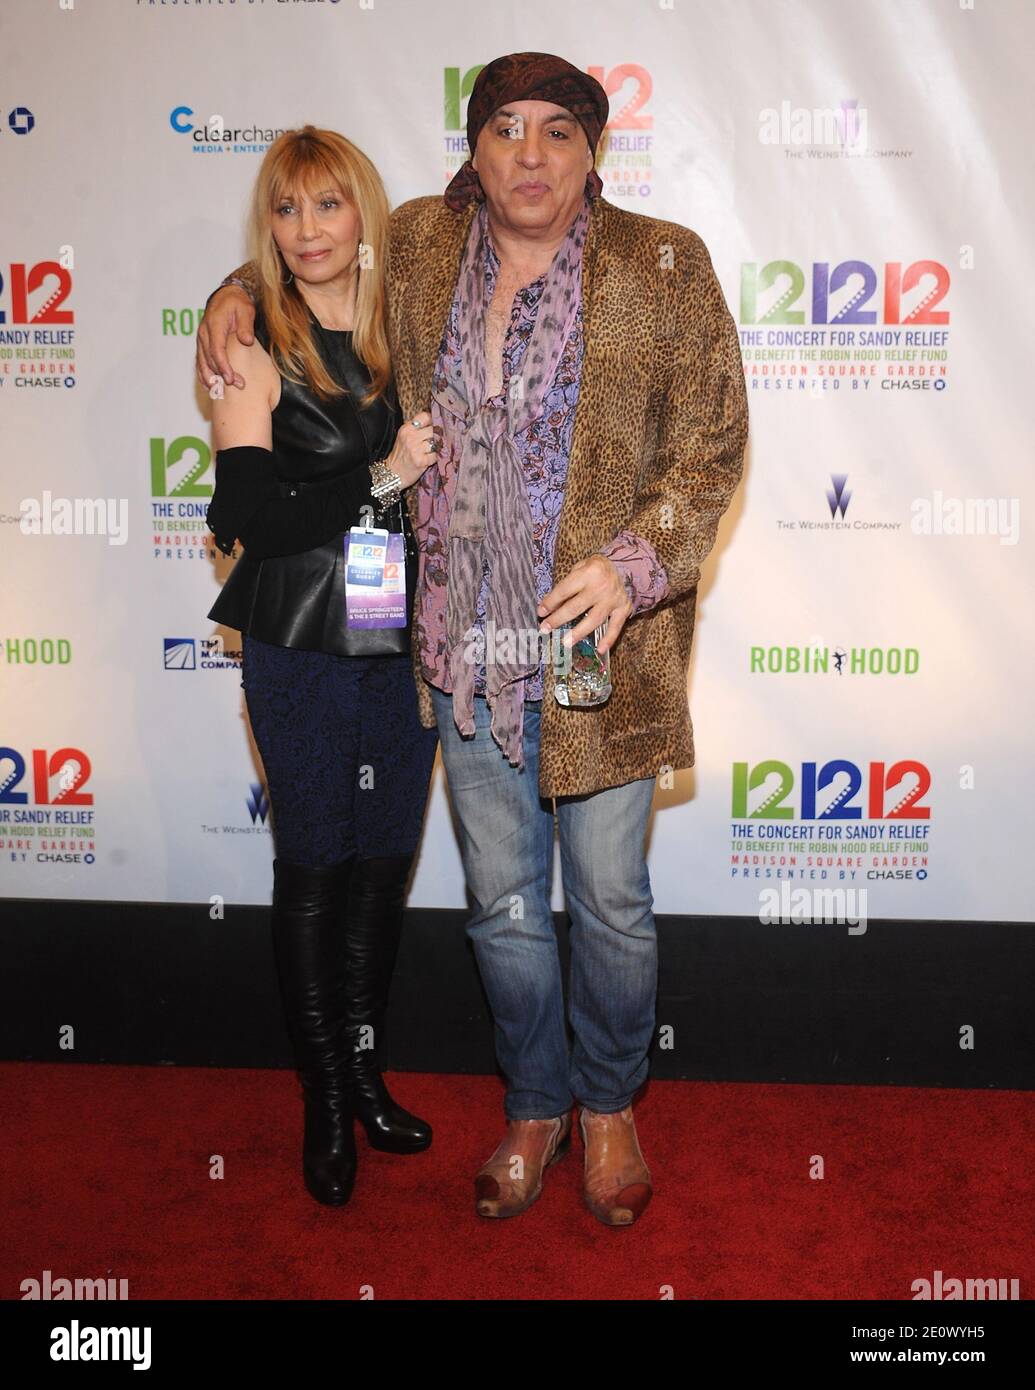 Steven Van Zandt and Maureen Van Zandt in the press room during '12-12-12' The Concert for Sandy Relief to benefit the Robin Hood Relief Fund presented by The Madison Square Garden Company and The Weinstein Company at the Madison Square Garden in New York City, NY, USA on December 12, 2012. Nearly 2 billion people have access to the benefit concert via television, radio and the internet. Photo by Brad Barket/ABACAPRESS.COM Stock Photo